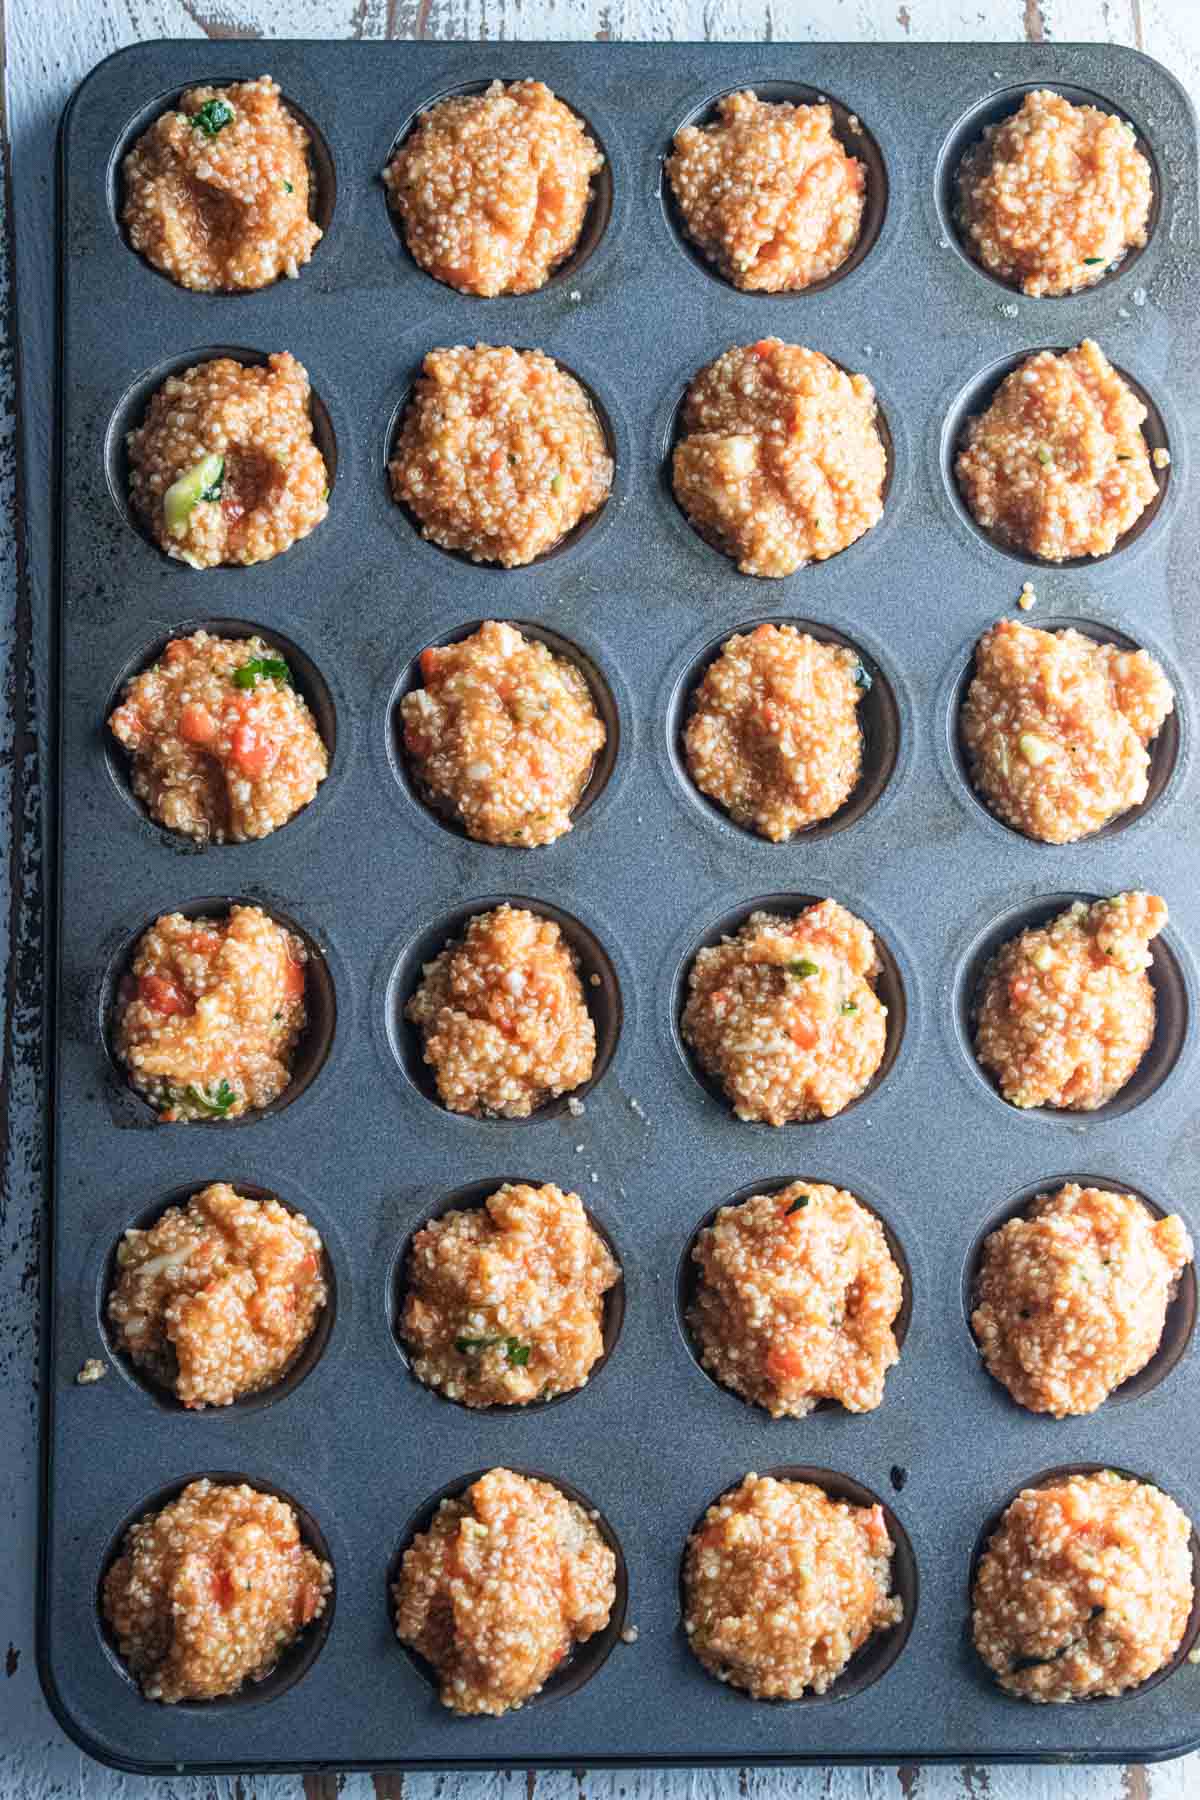 Step 3 - a mini-muffin tray filled up with the buffalo quinoa mixture.